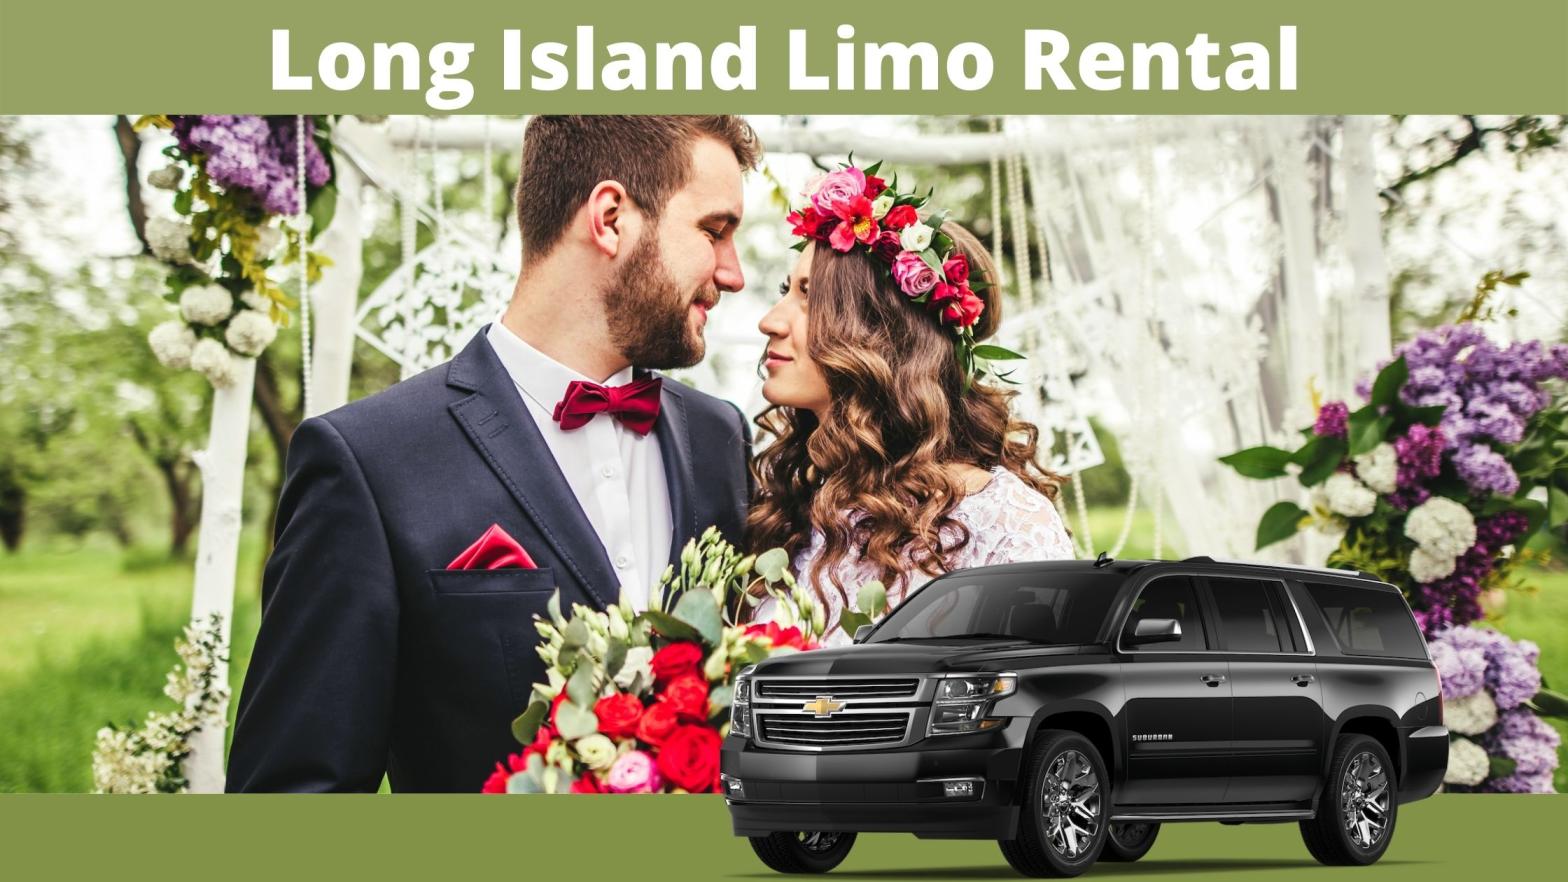 Hiring a Limo for Your Wedding in Long Island